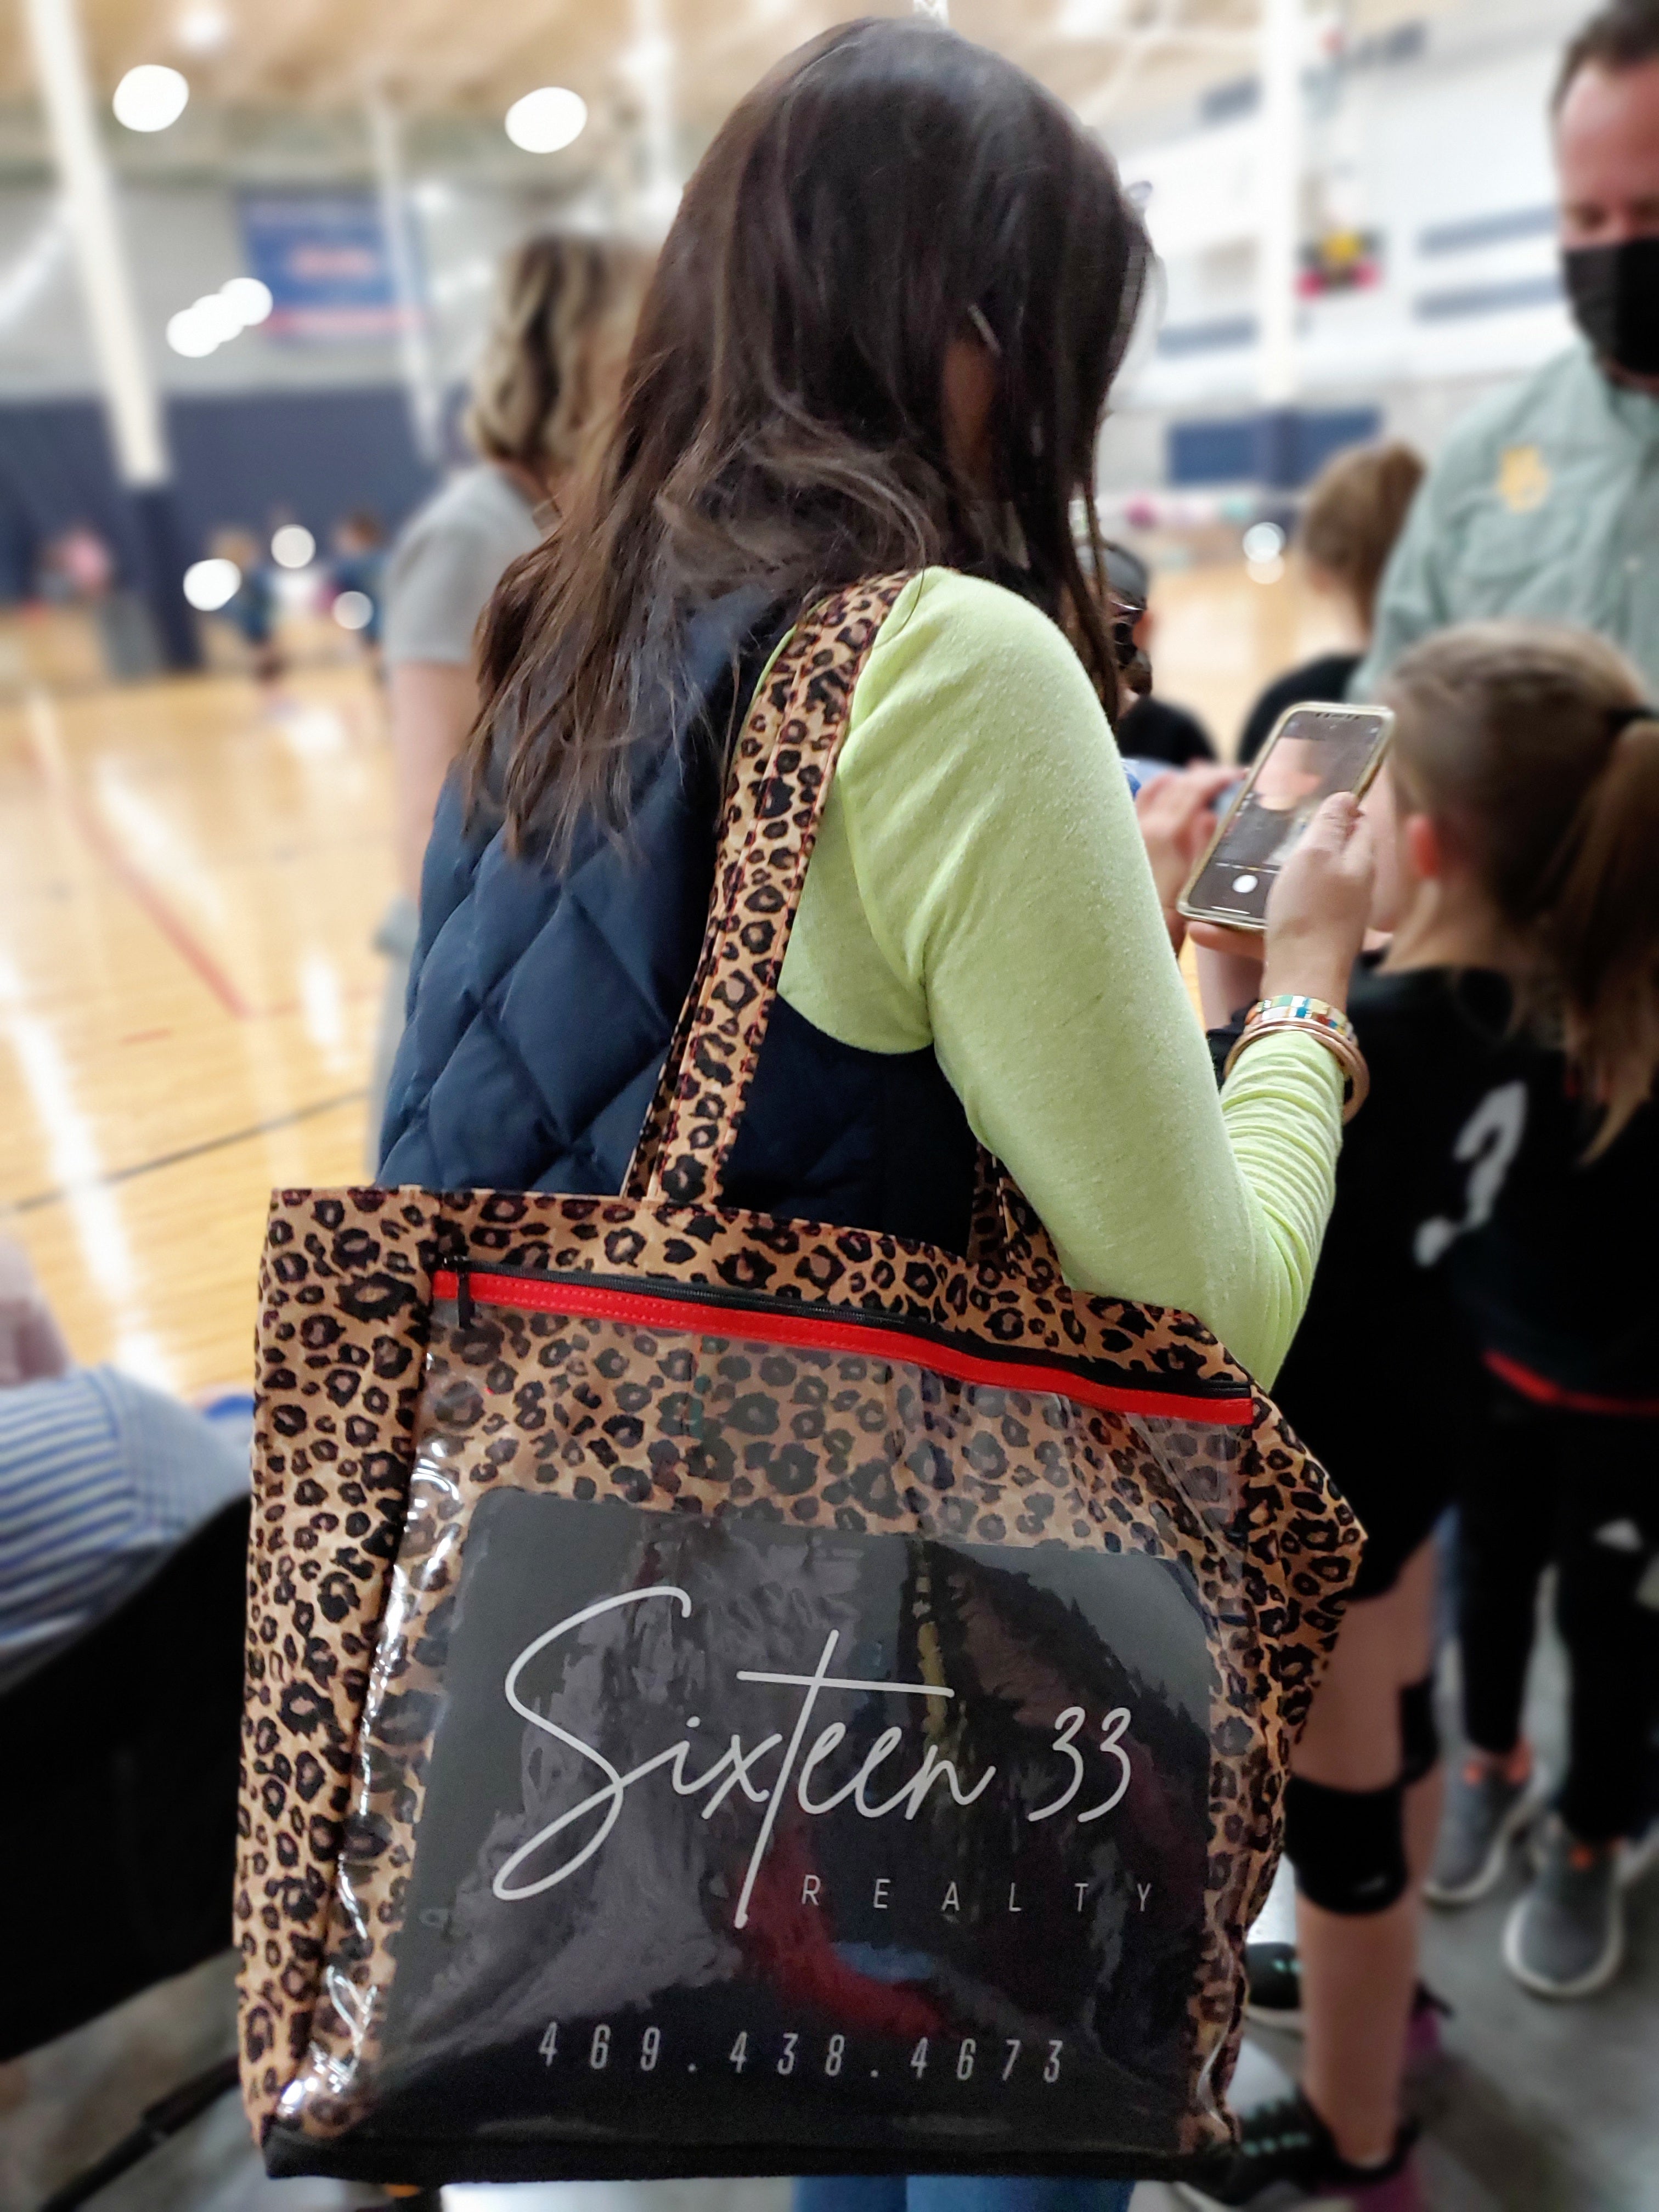 Woman on phone at a sporting event holding a leopard tote marketing her reality business.